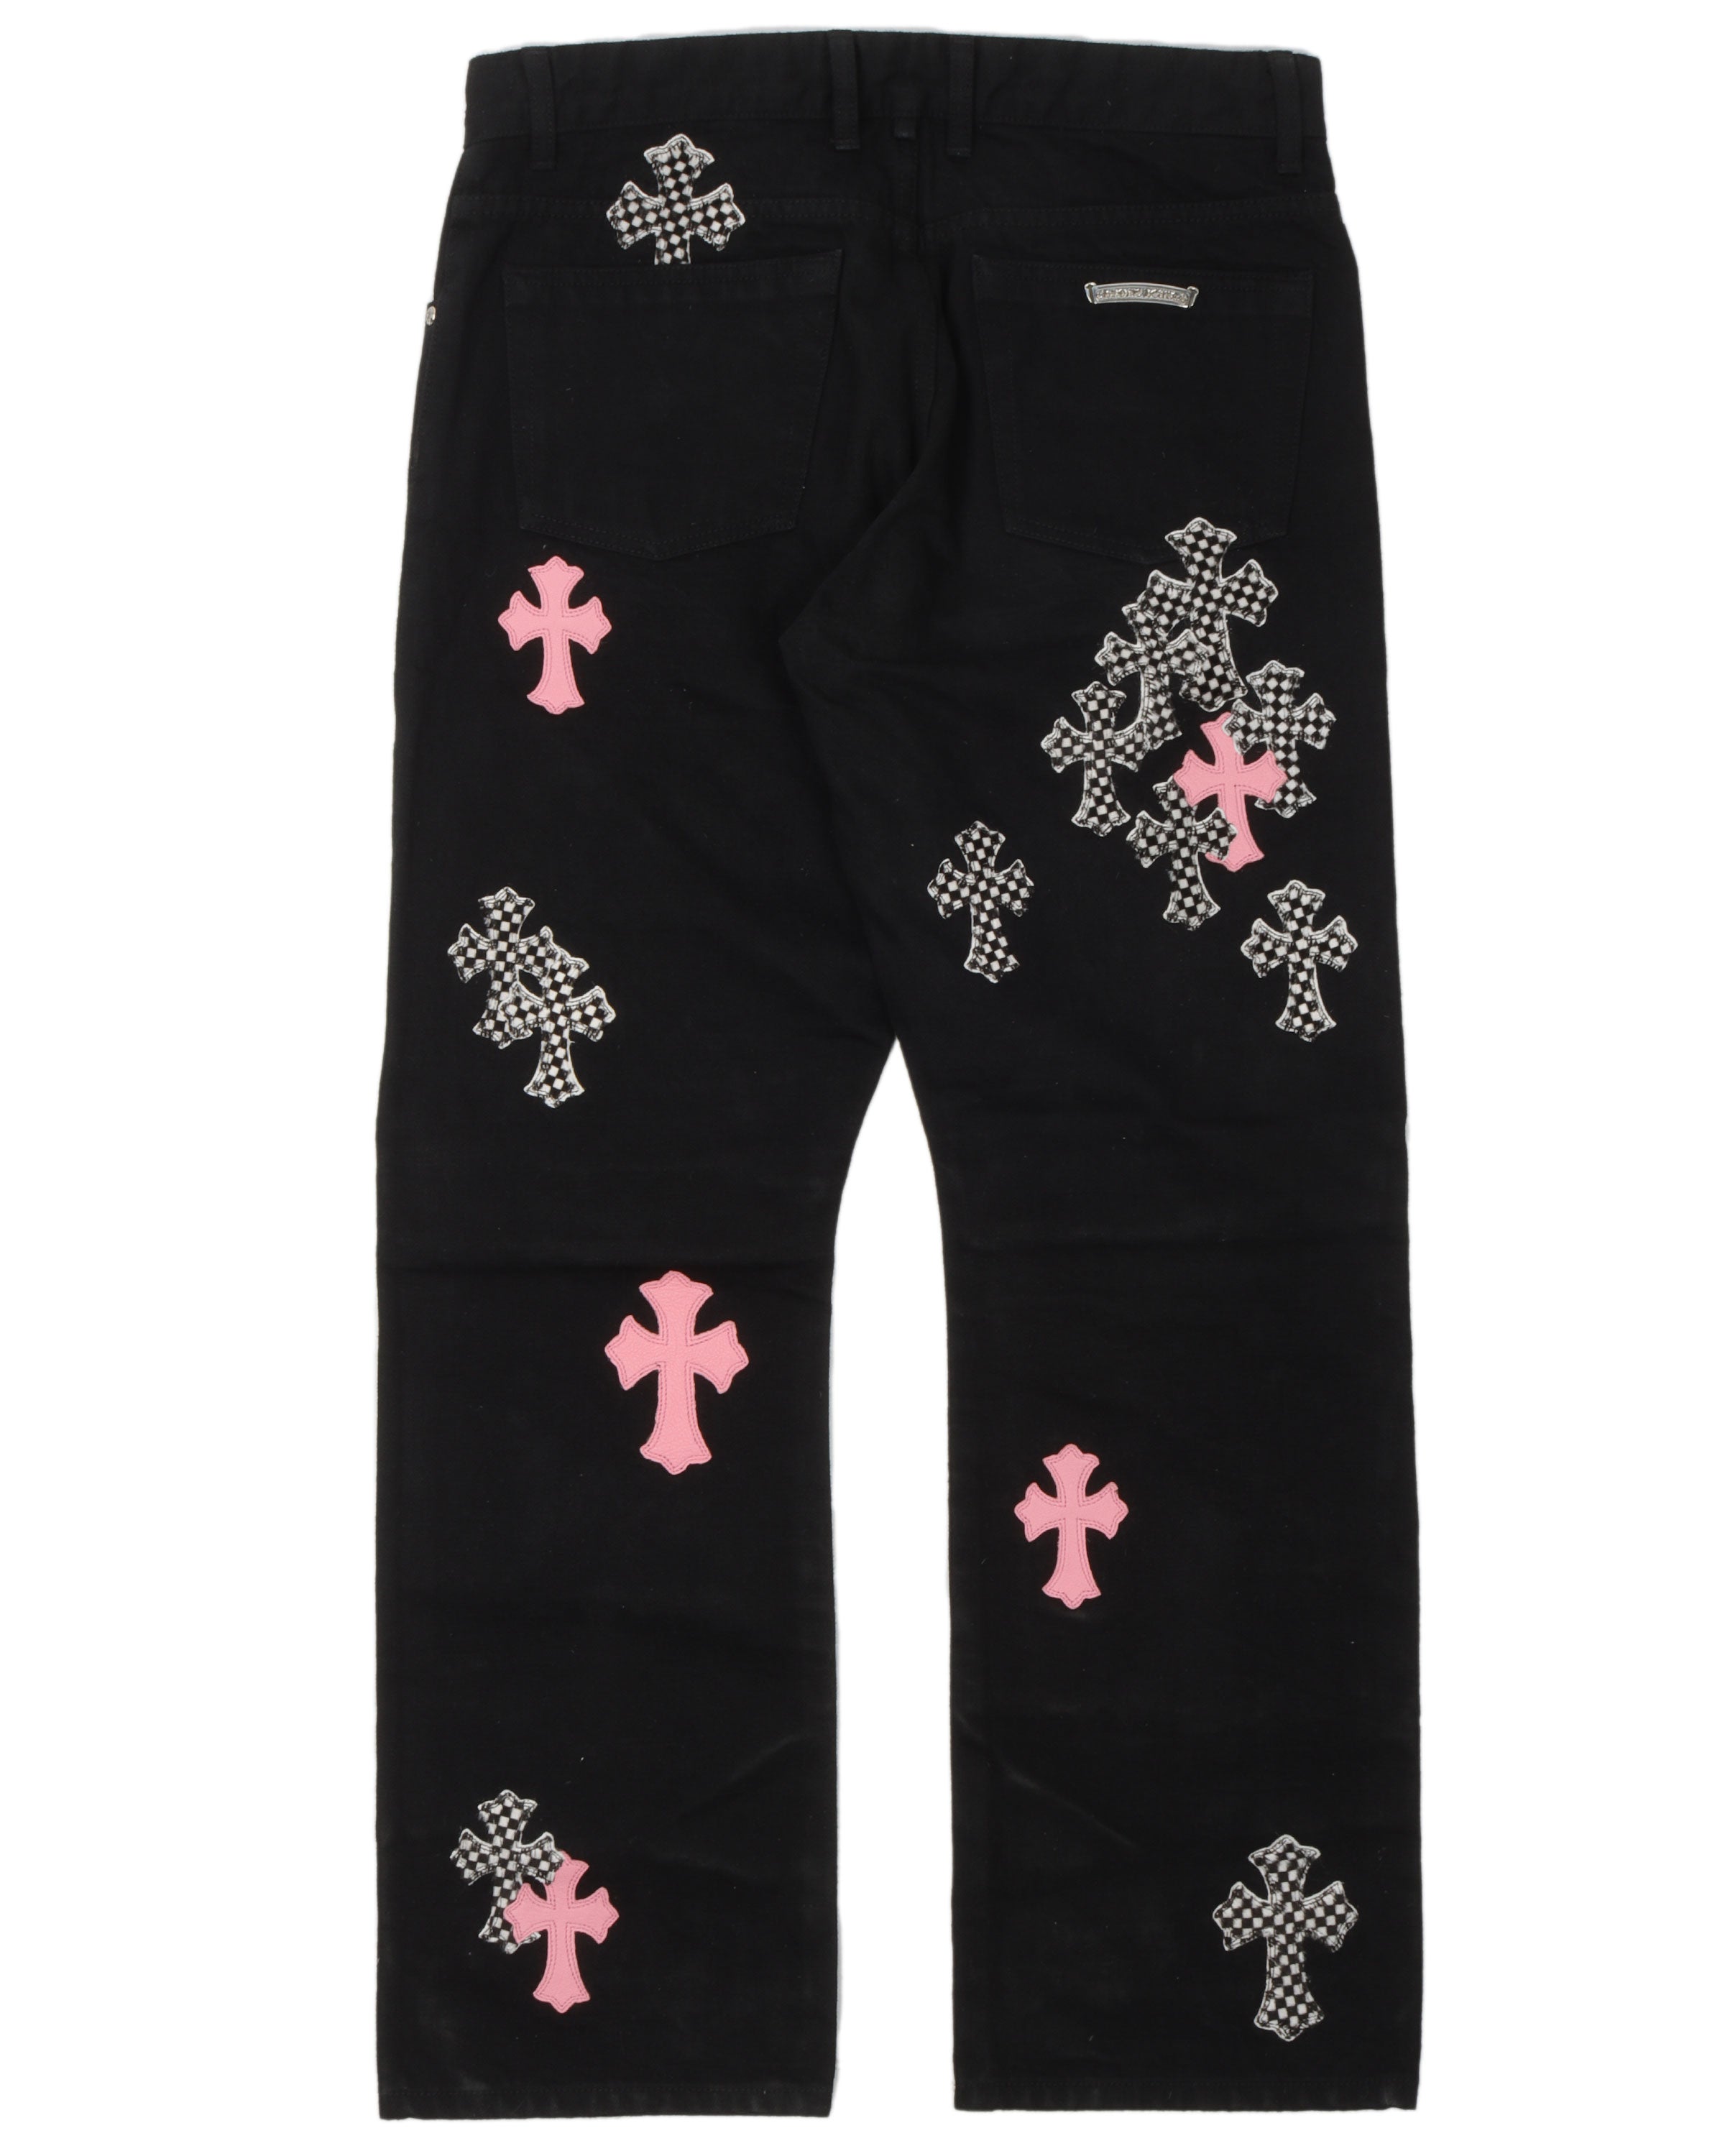 Checkered Cross Patch Fleur-Knee Jeans w/ 35 Cross Patches